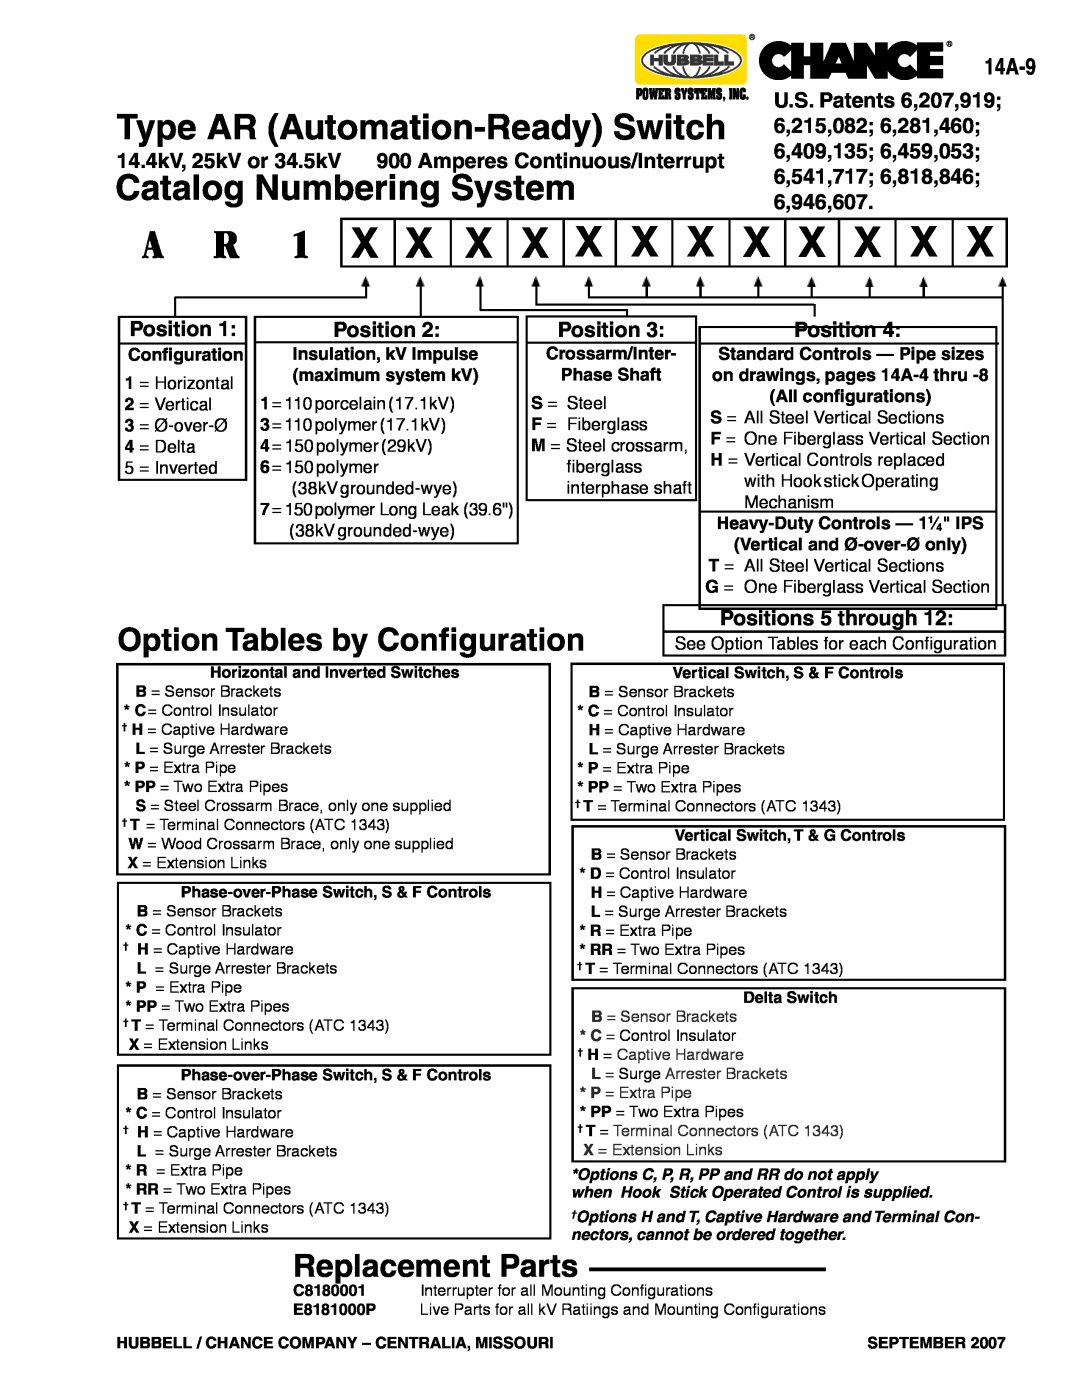 Hubbell Type D7 Catalog Numbering System, Option Tables by Configuration, Replacement Parts, 14A-9, U.S. Patents 6,207,919 